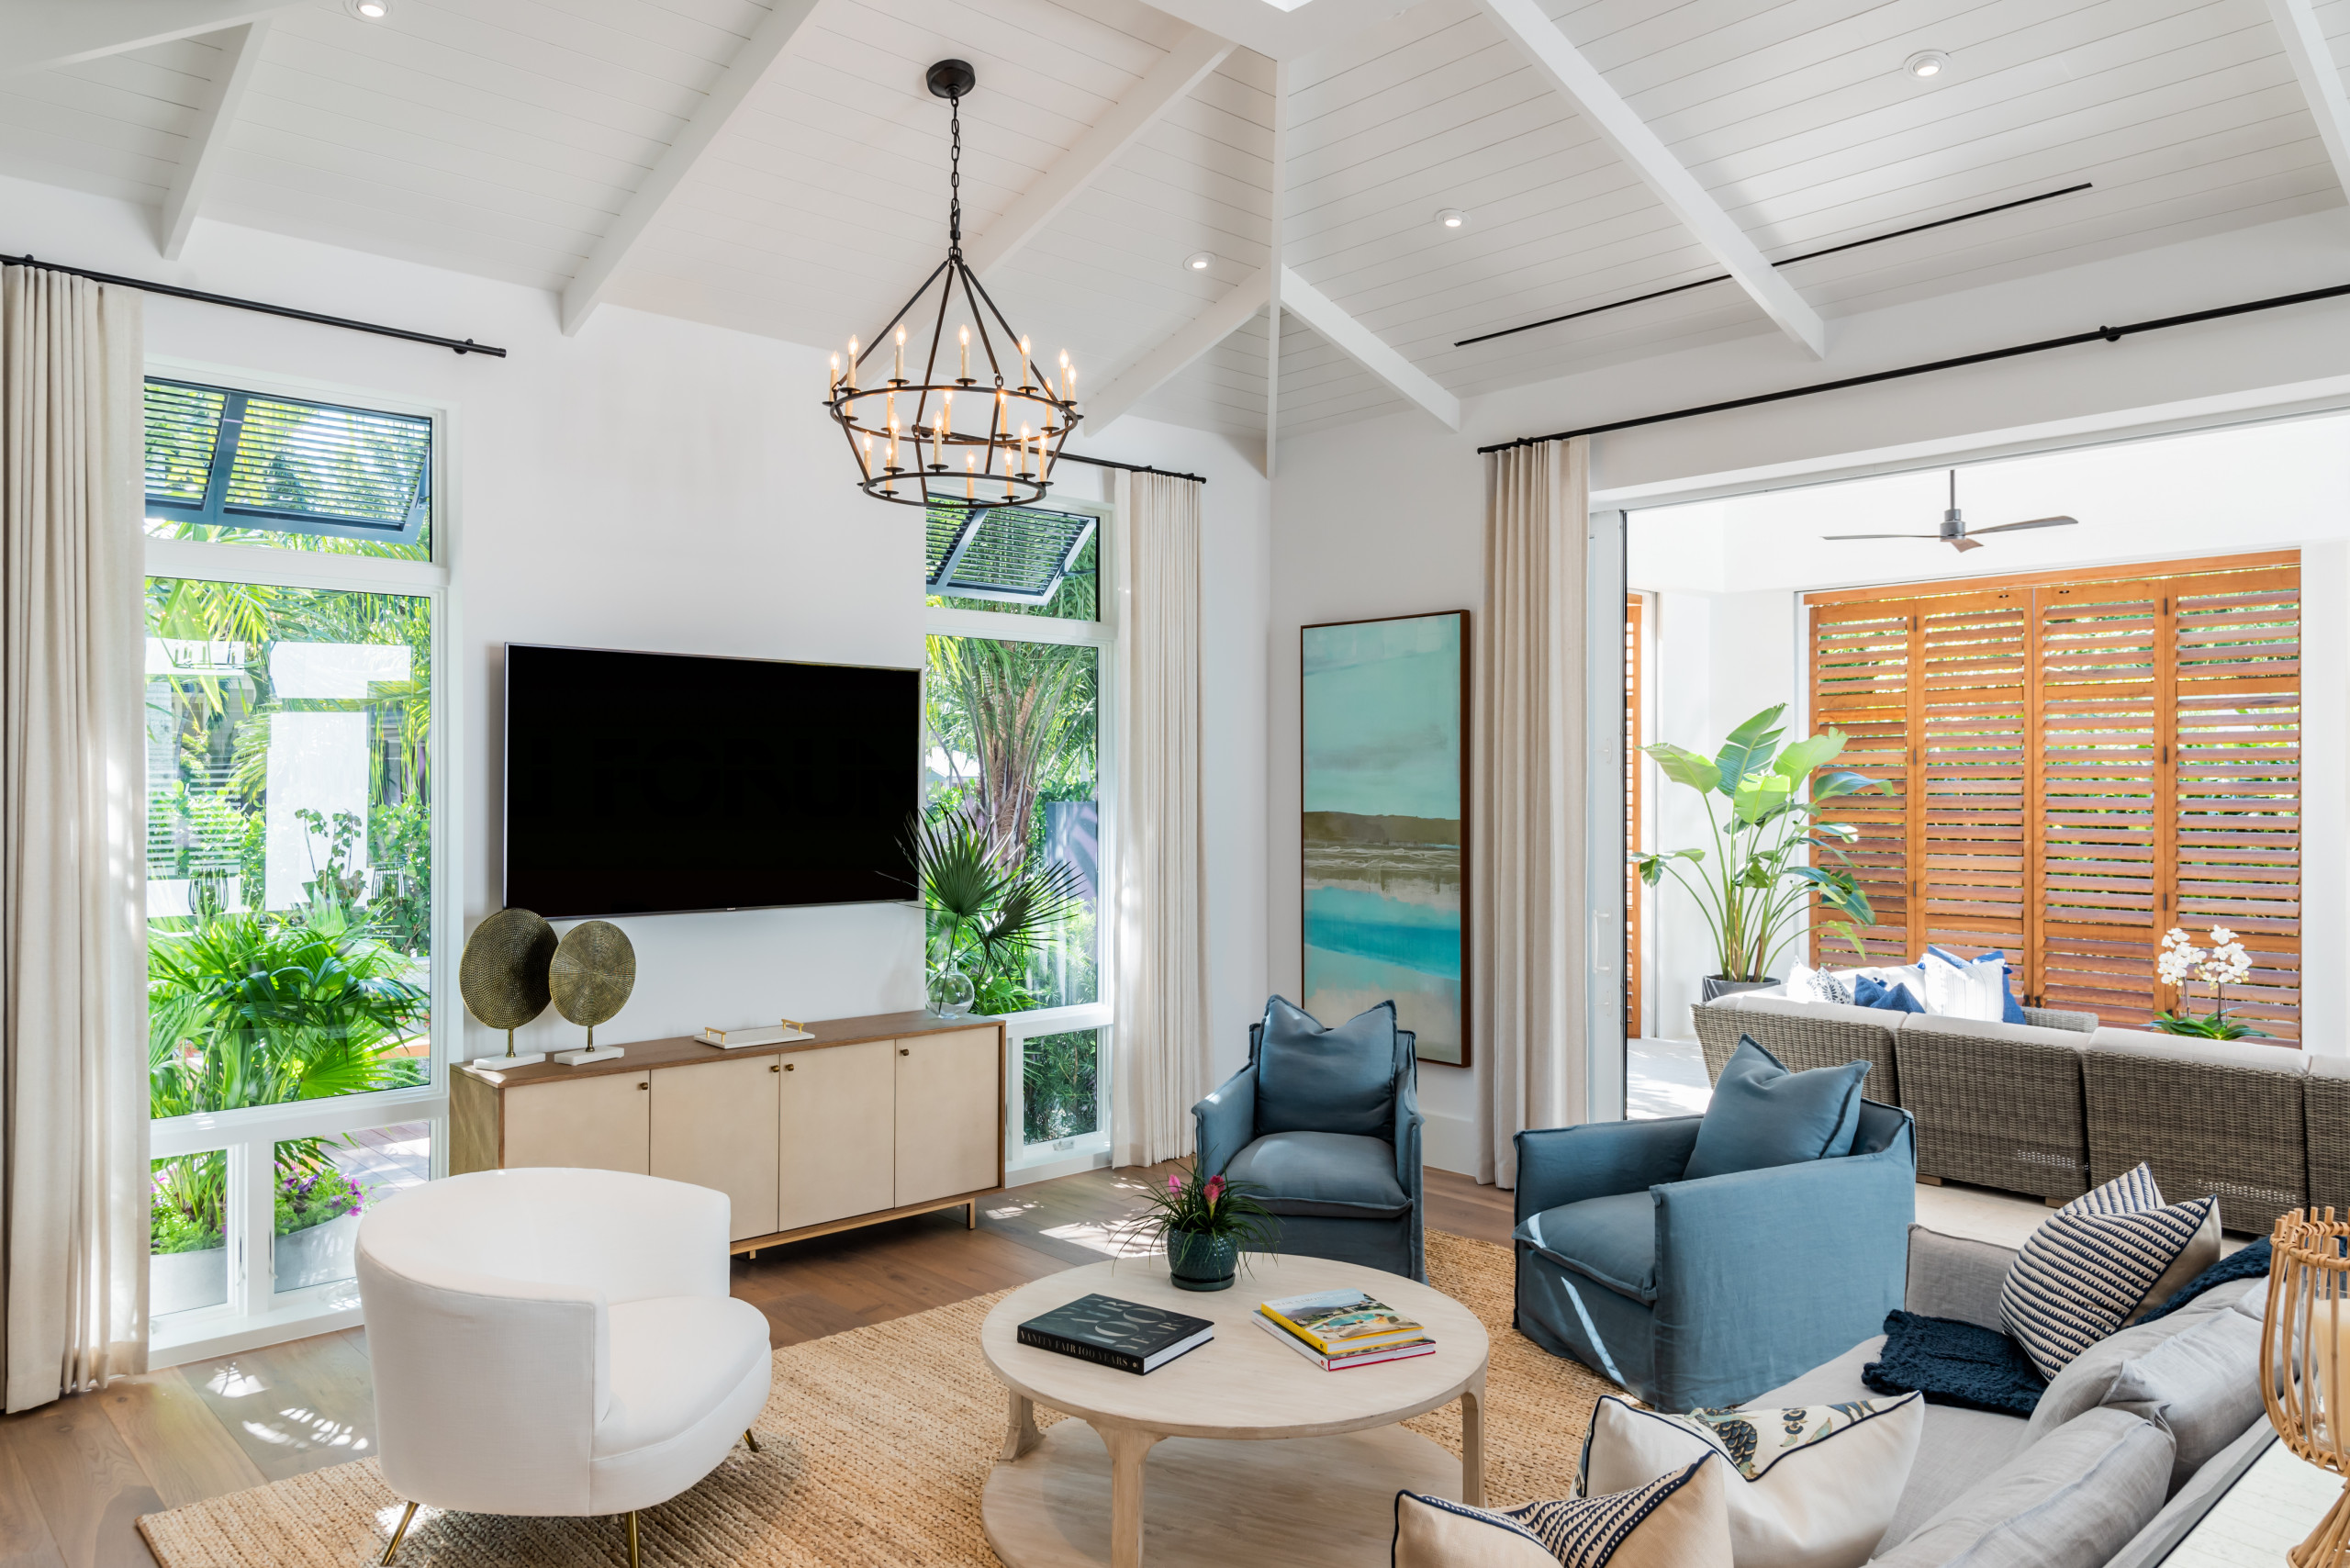 Shades of blue and beige are part of the color scheme (from Houzz)